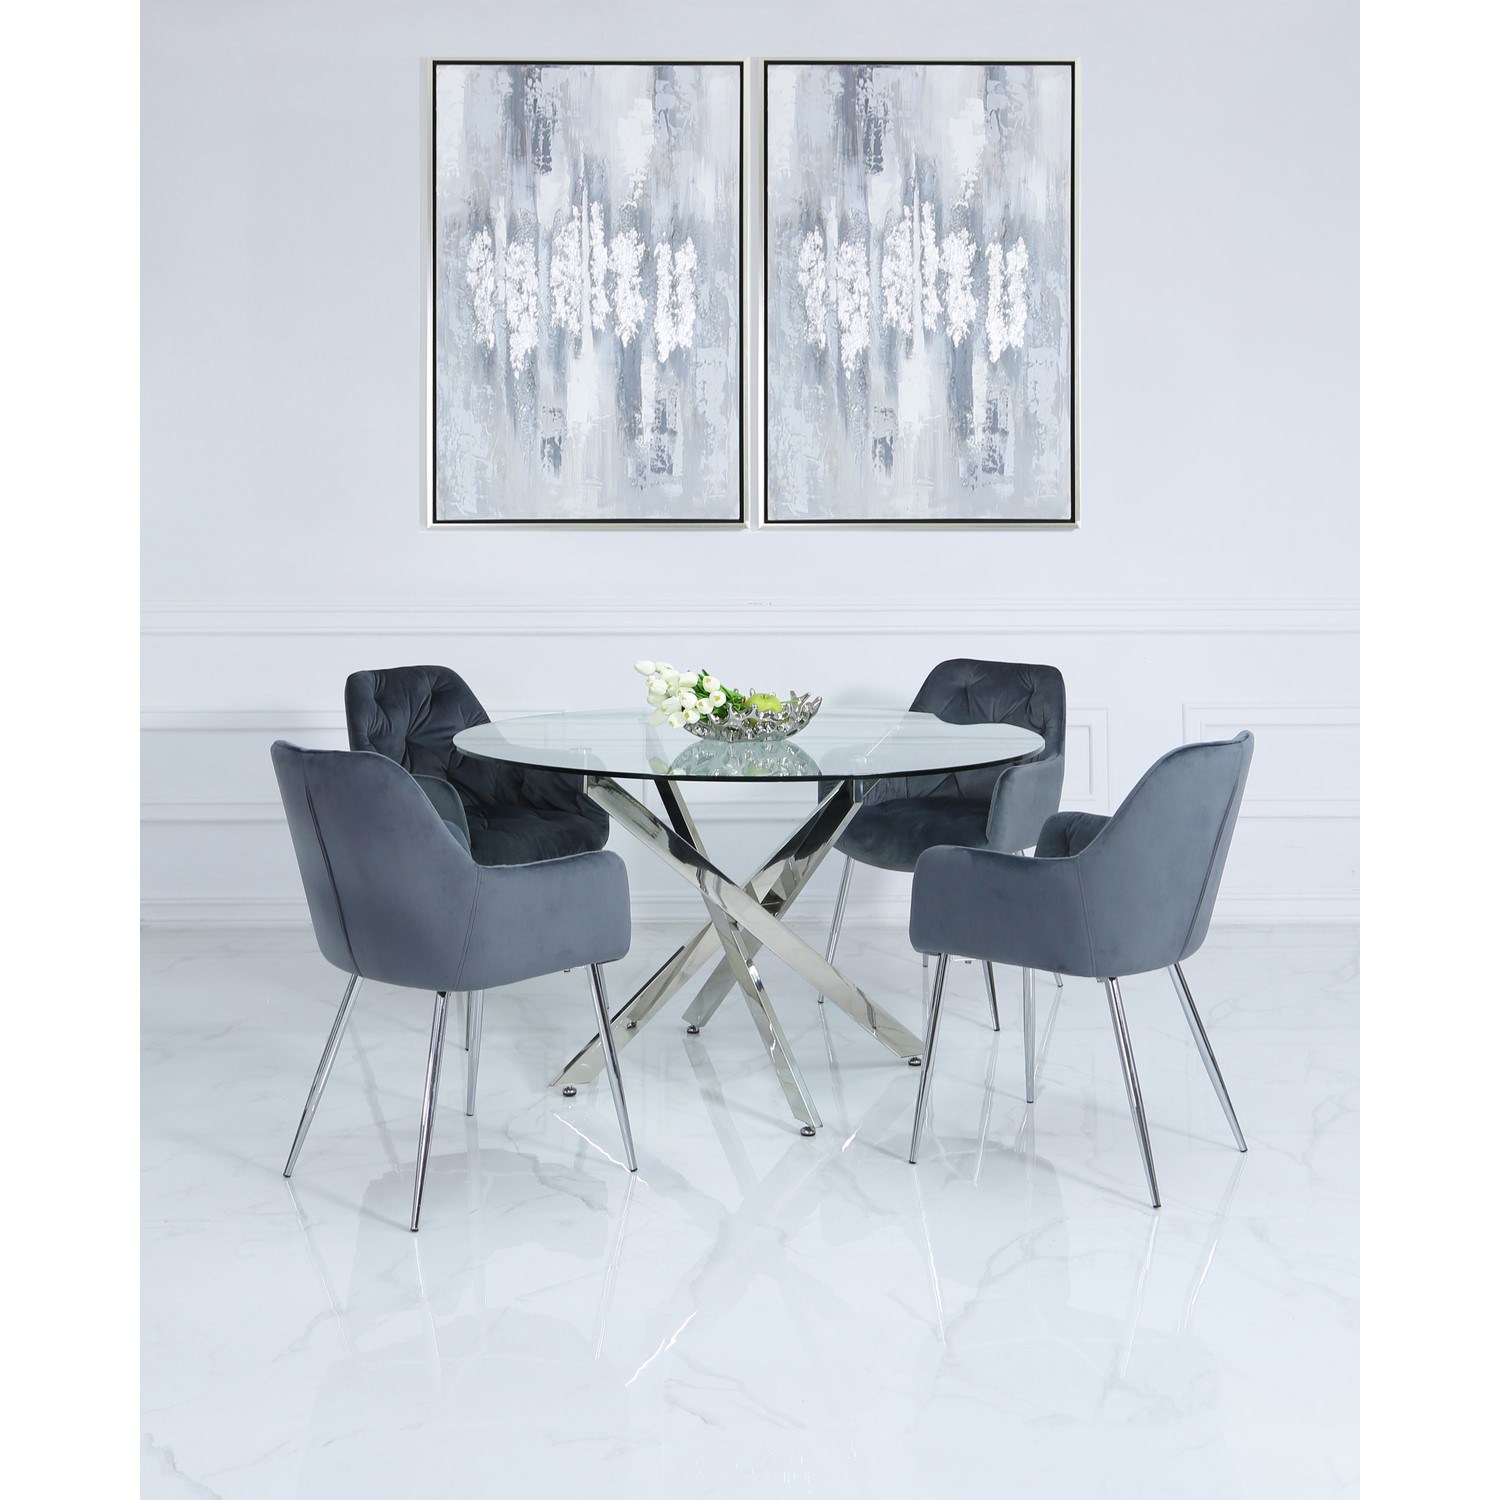 130cm Chrome Glass Round Dining Set, Round Dining Table And 4 Chairs Set